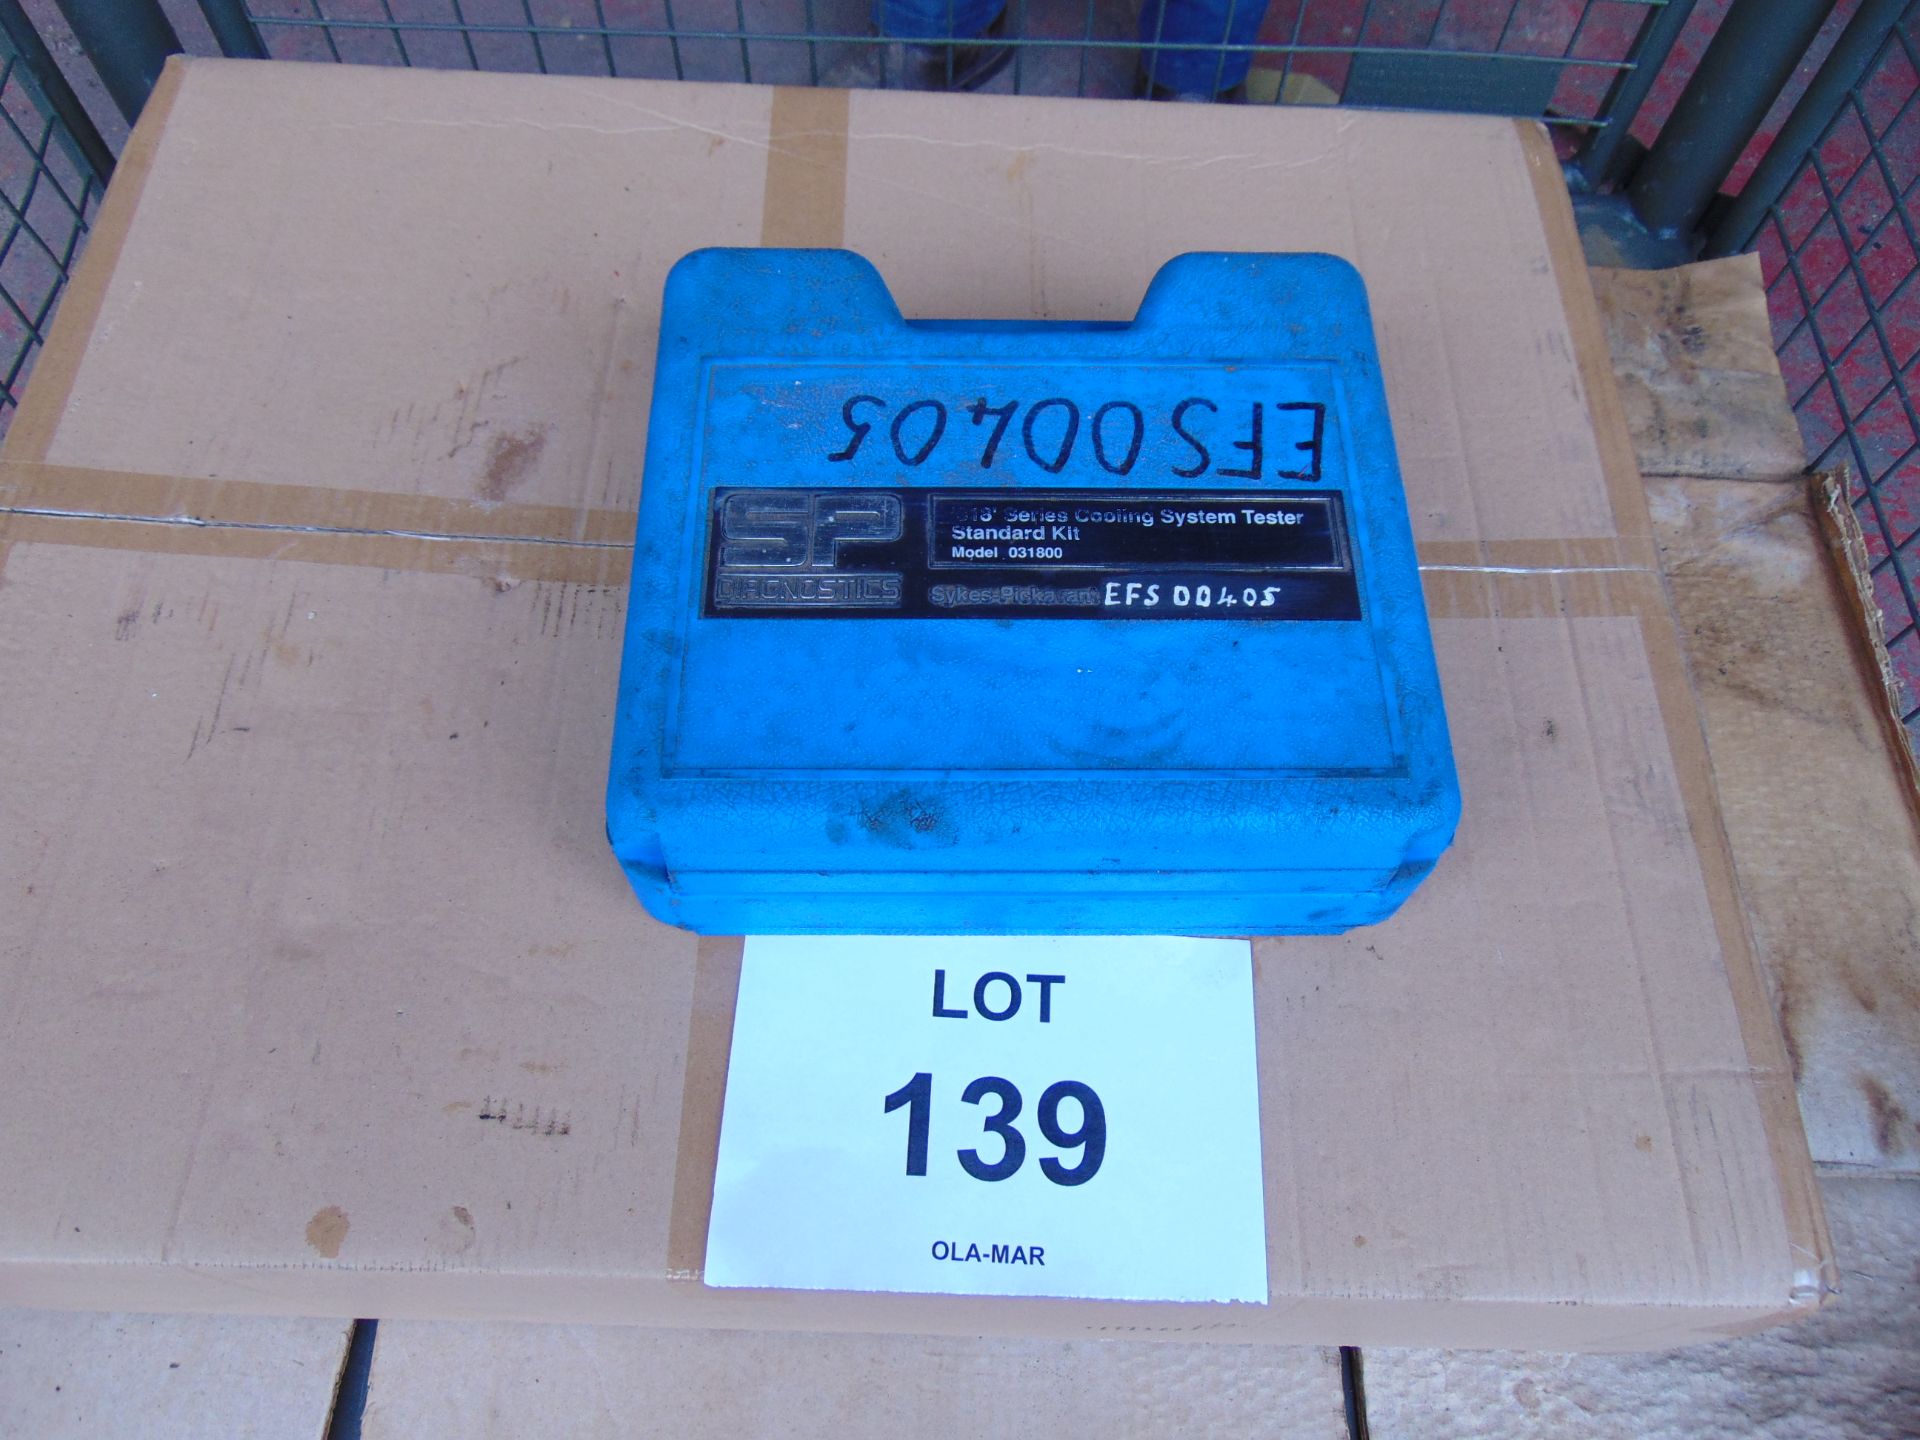 S.P Cooling System Testing Kit from UK Fire Service Workshop in Transit Case - Image 5 of 5